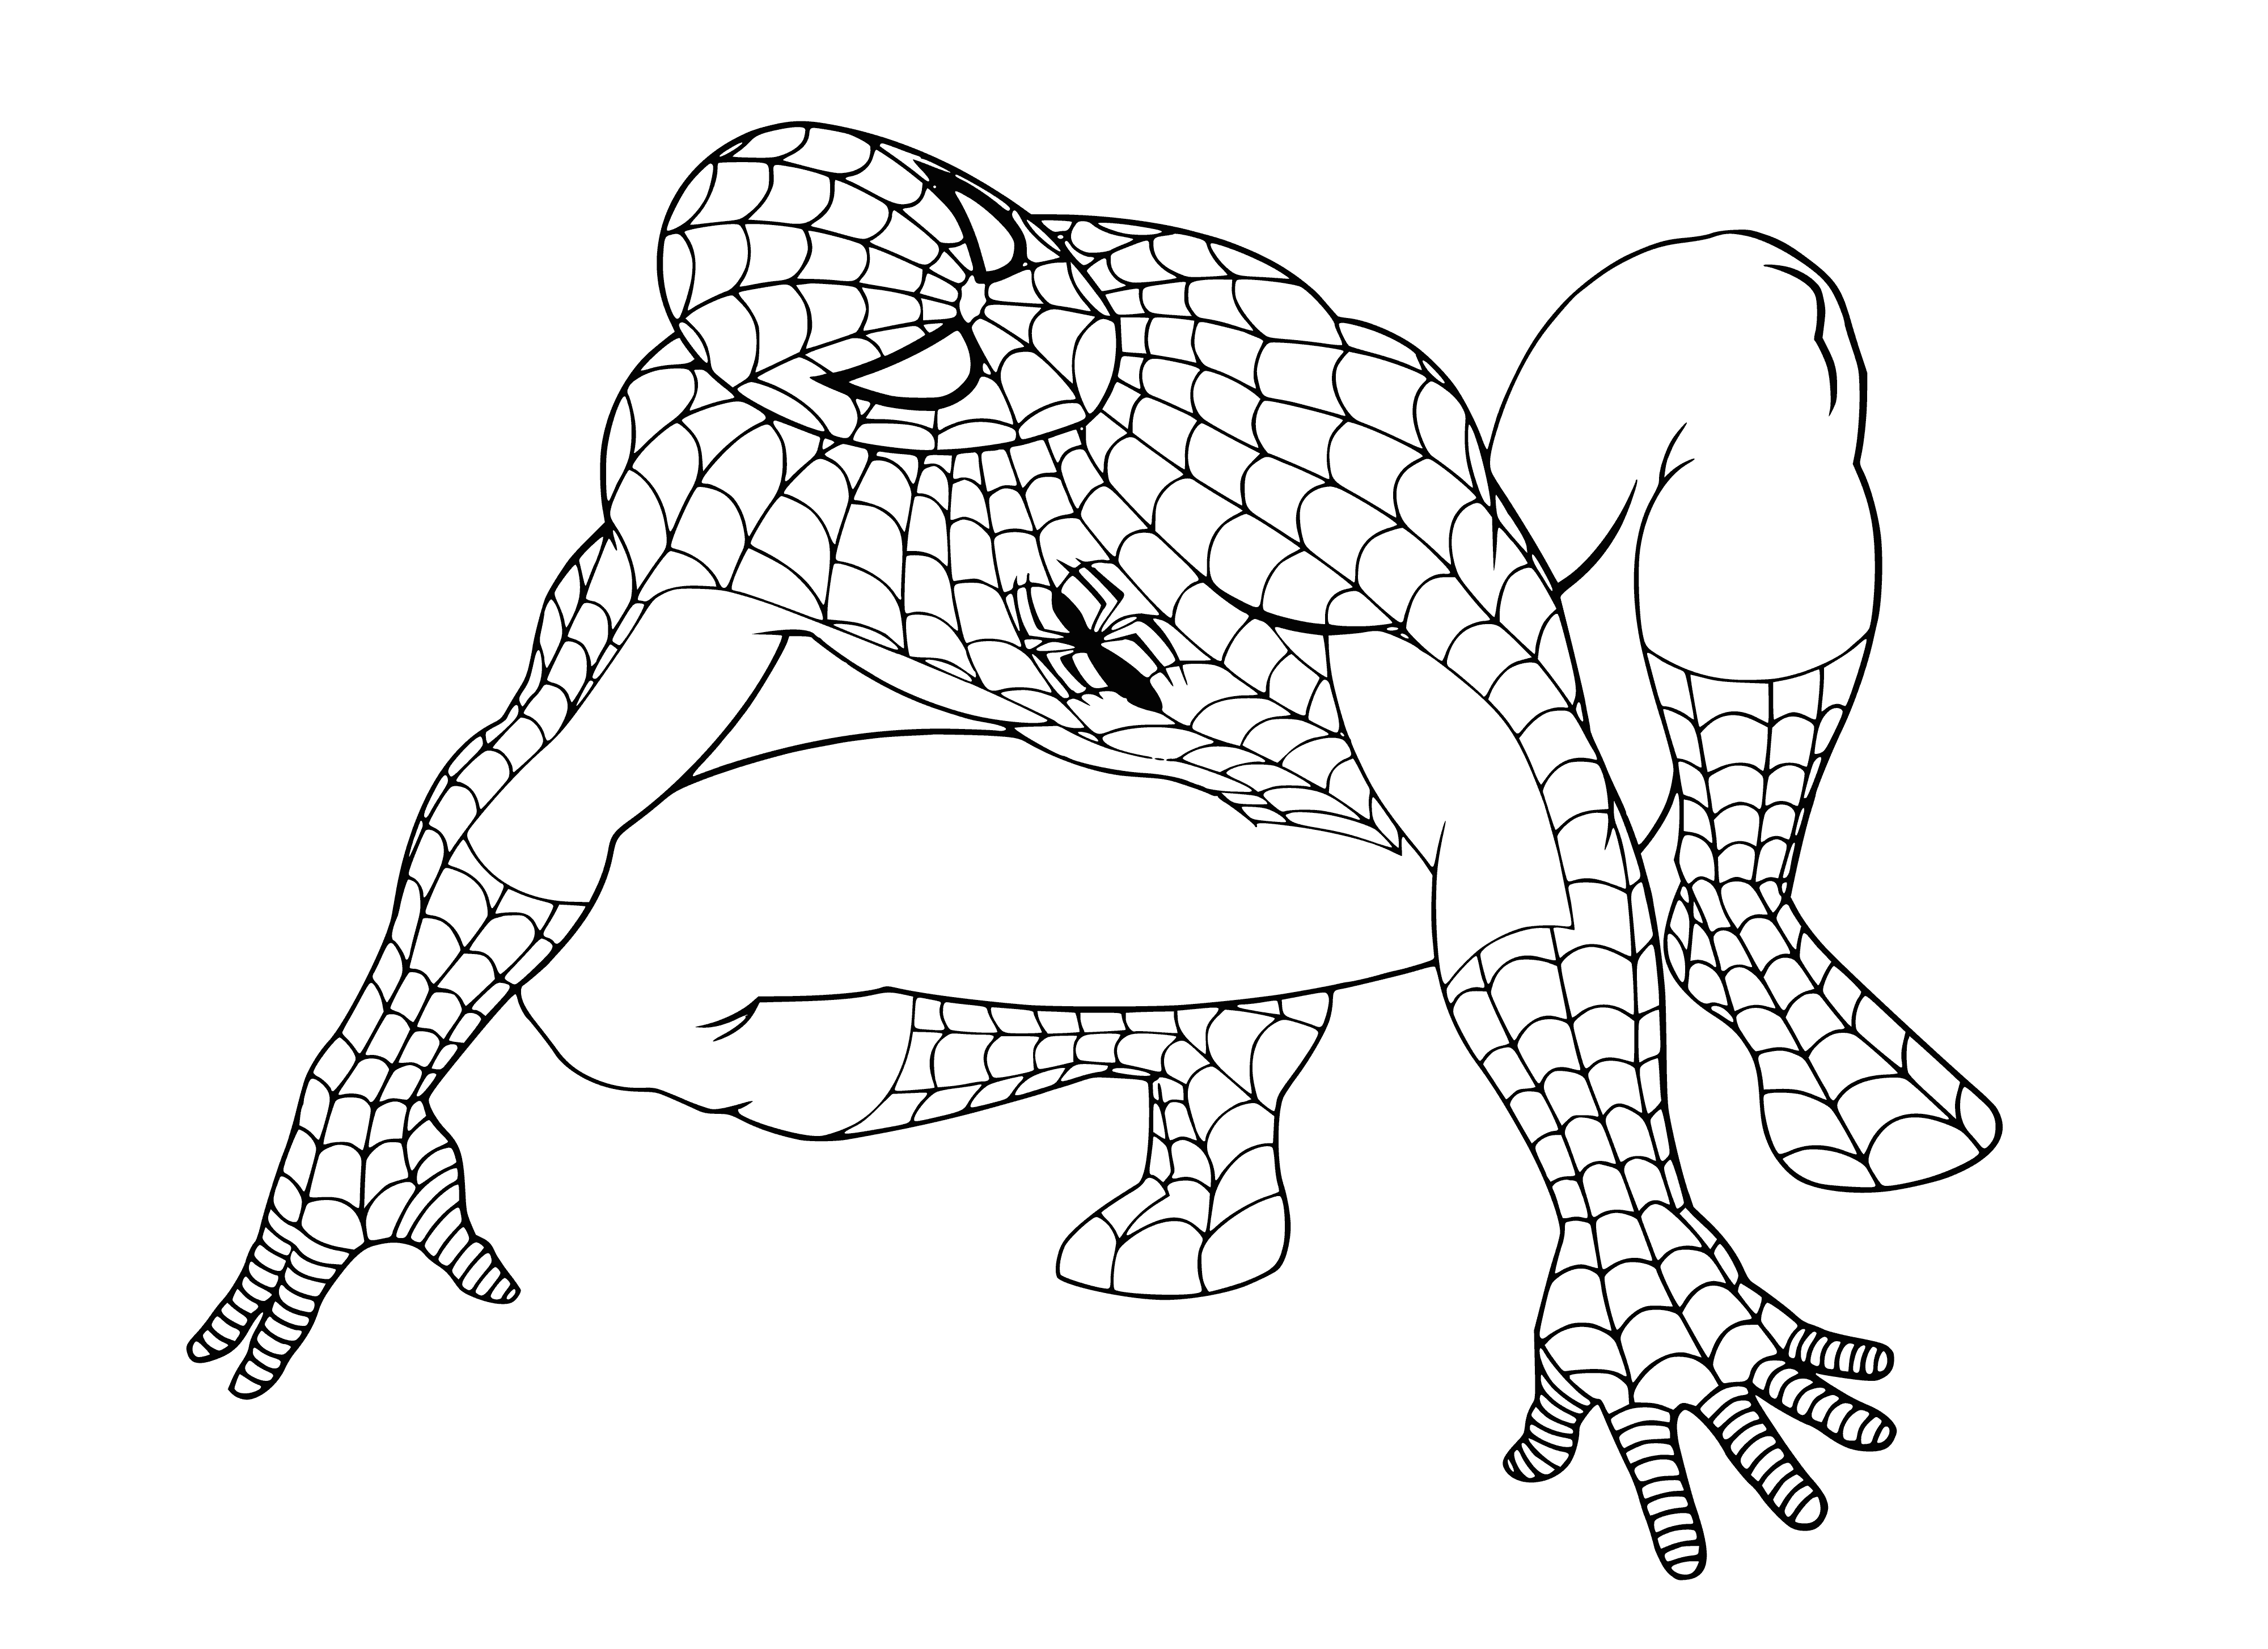 coloring page: Large red/blue spider wearing costume w/white symbol stands on a web between buildings with people & cars in the bg. #creativewriting